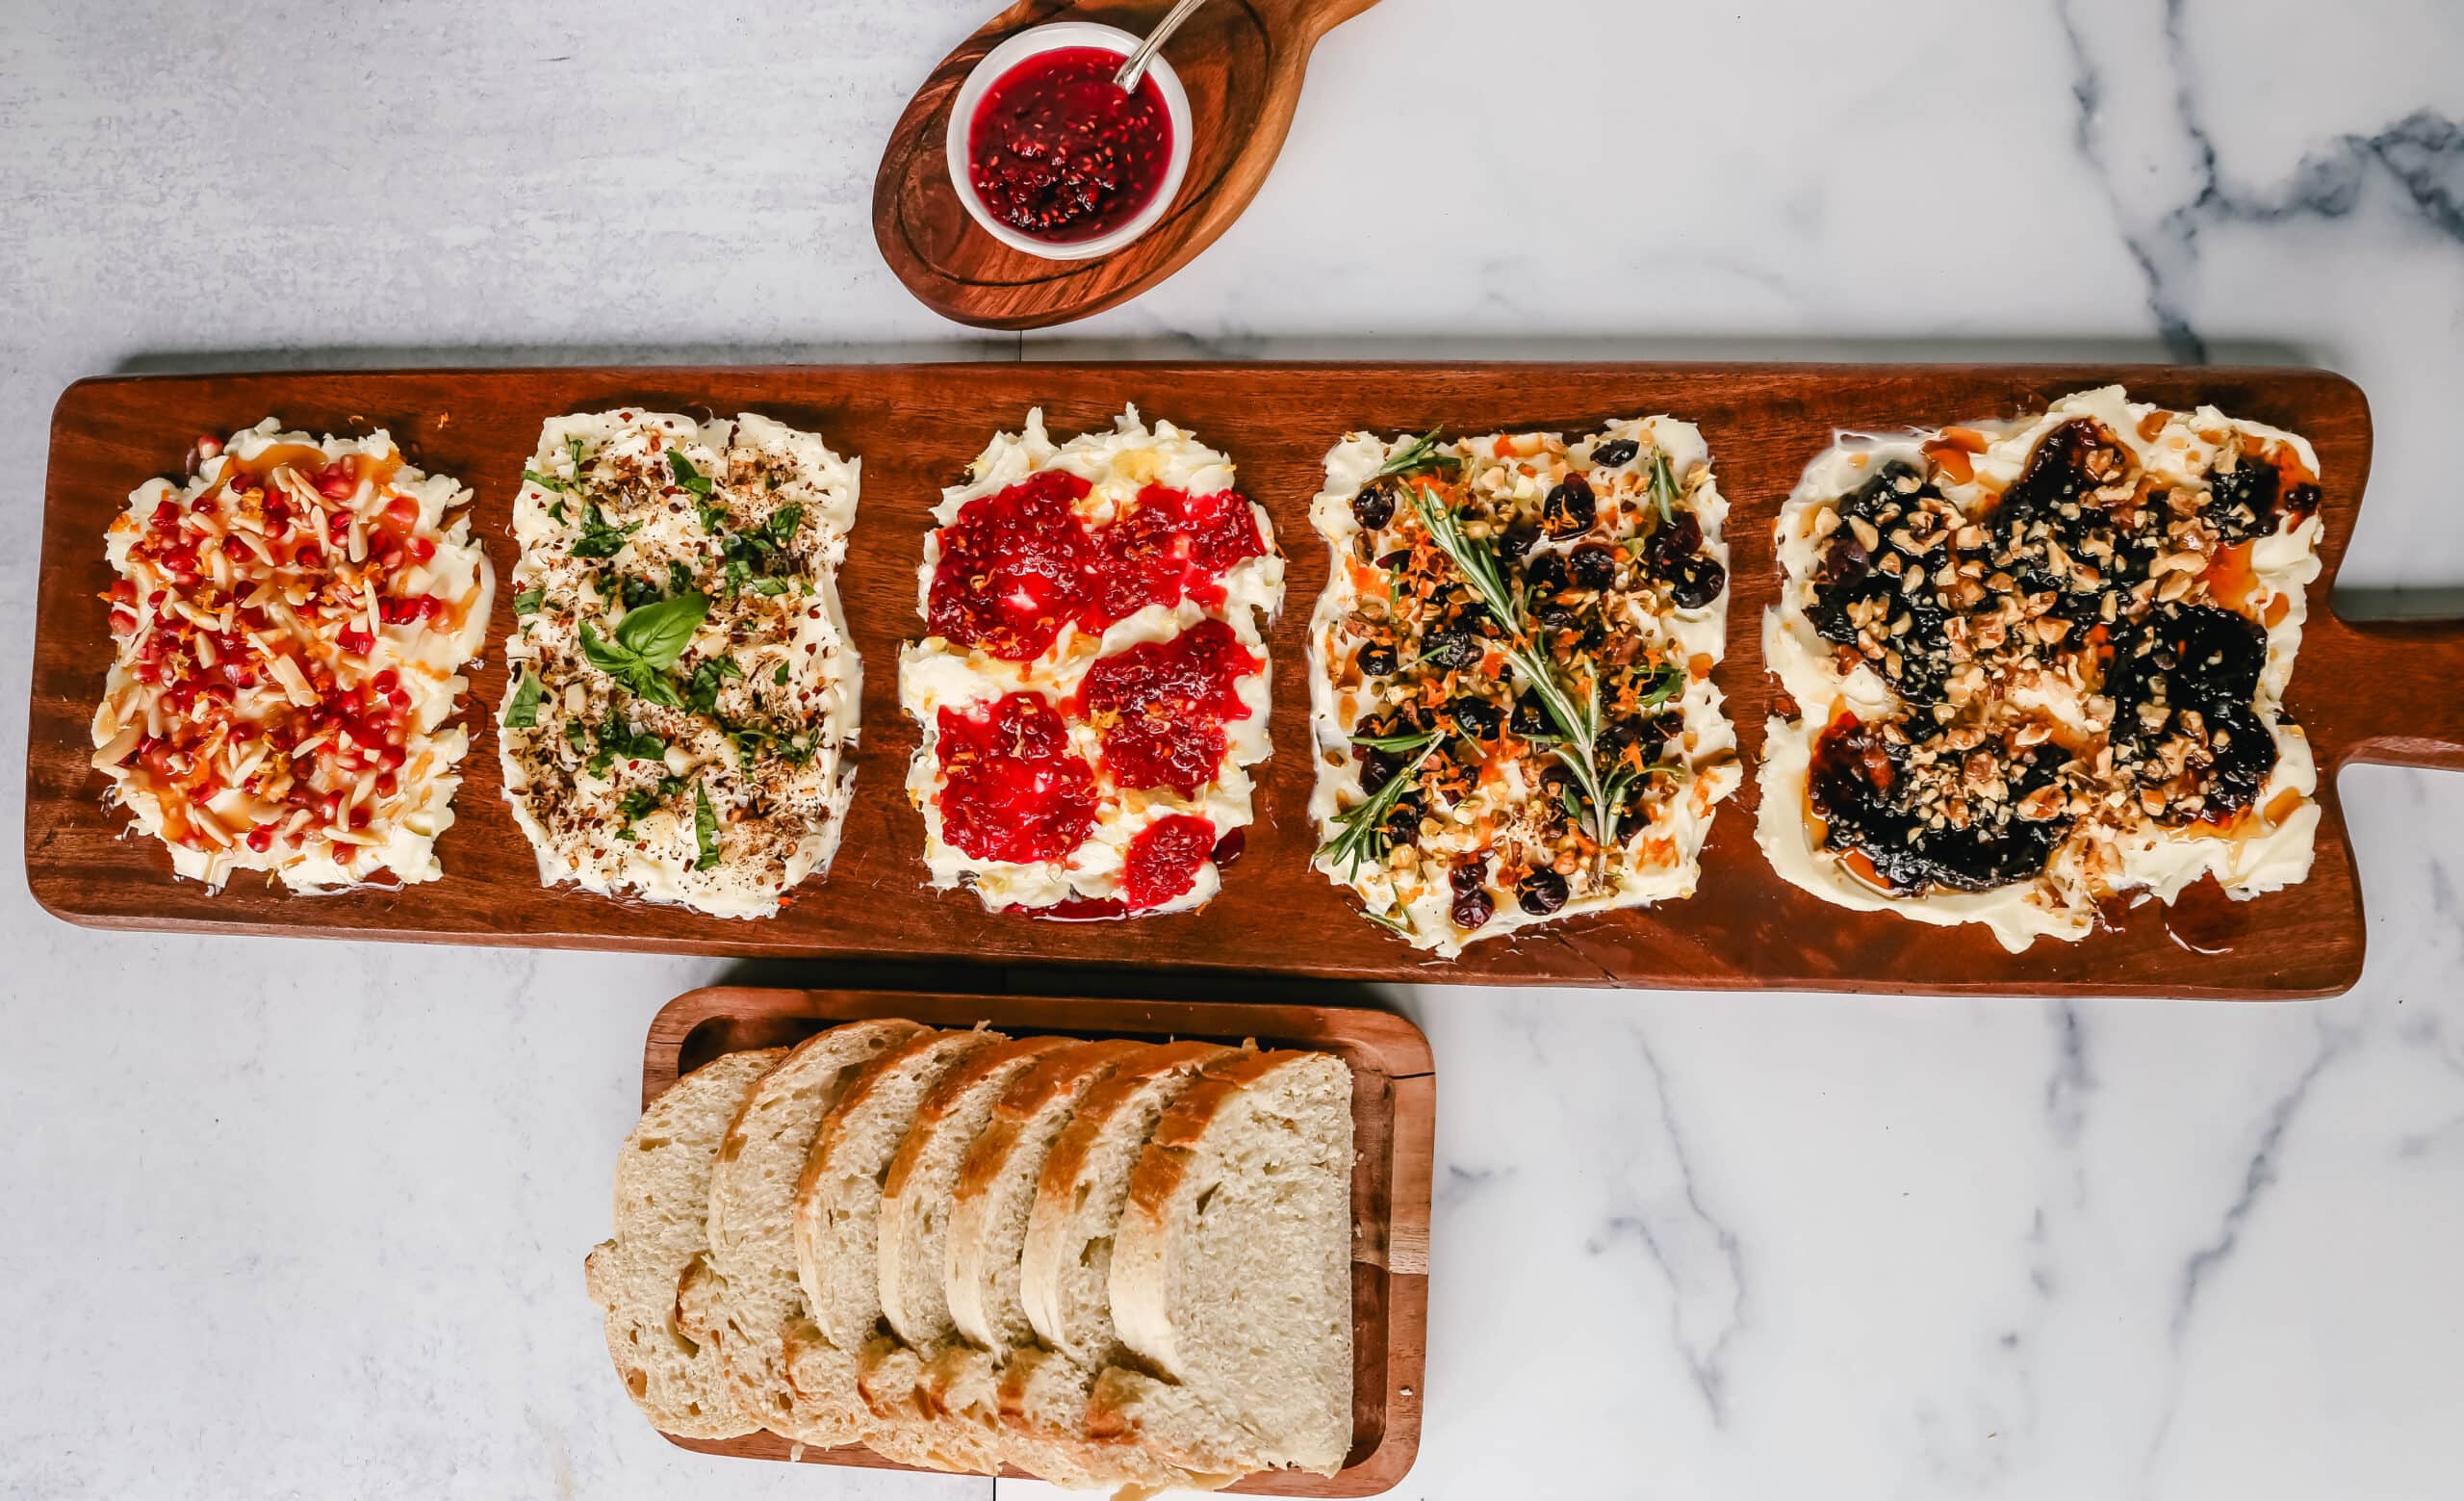  A Butter Board with fresh butter is spread onto a board and topped with an assortment of toppings and served with warm bread. This Butter Board with Toppings is such a fun appetizer for a party!